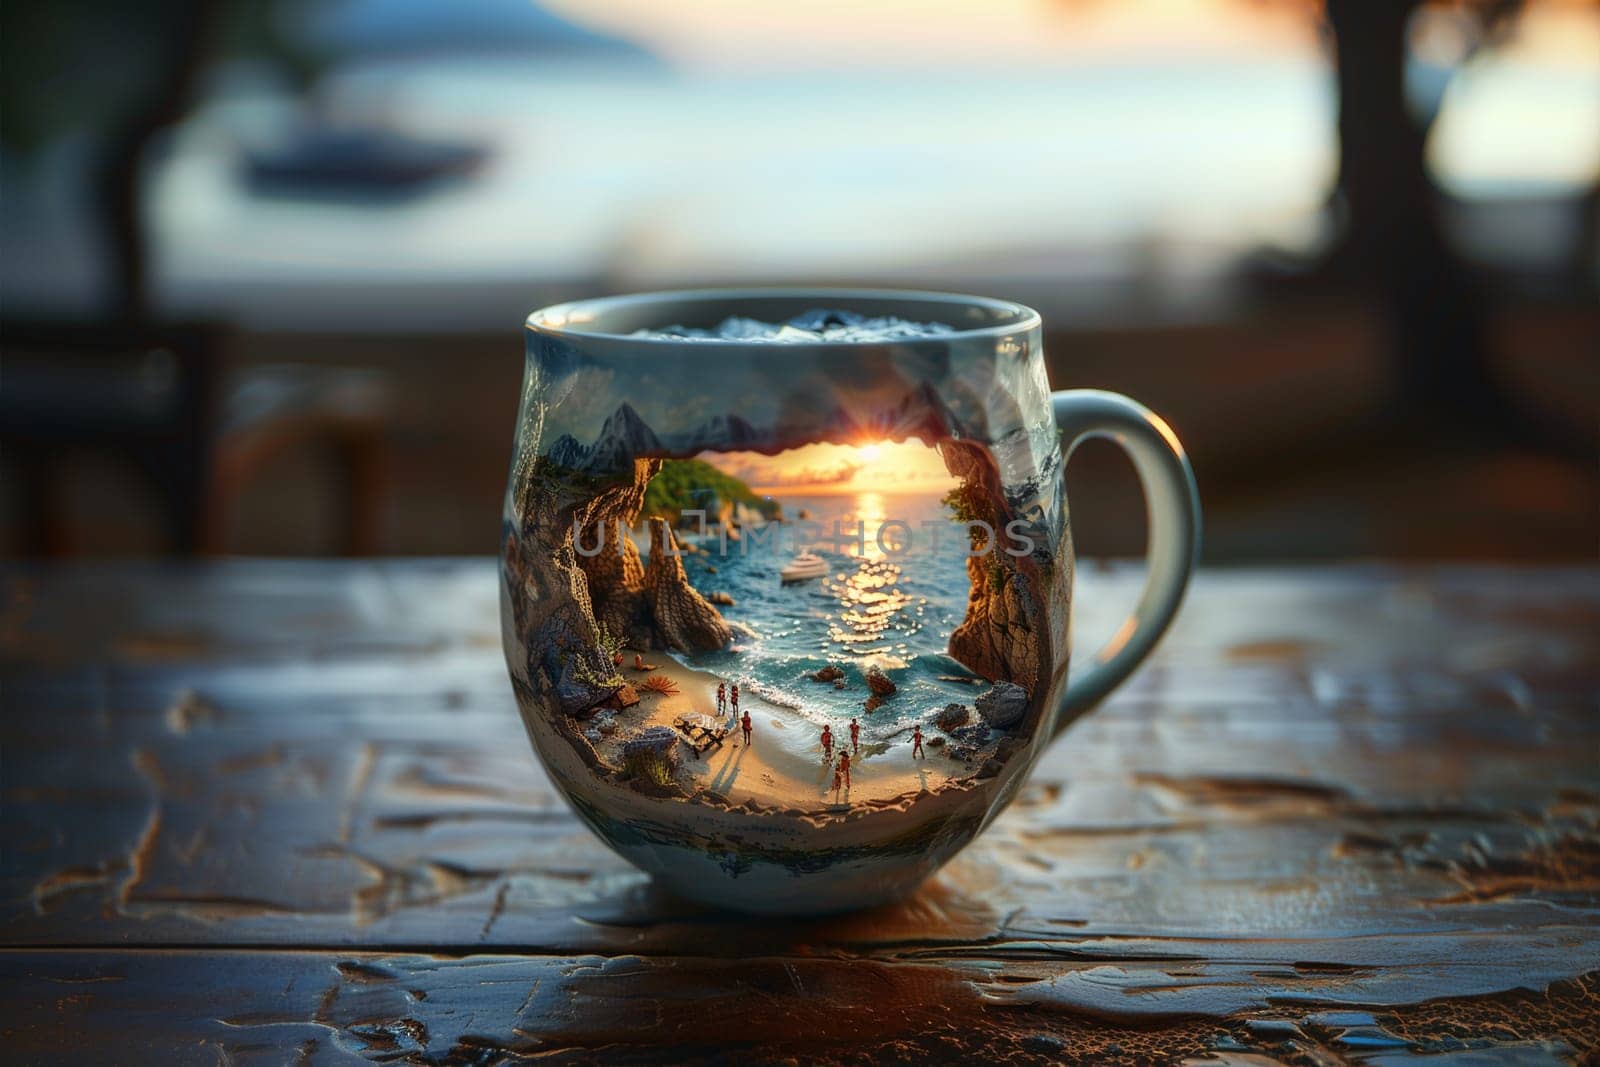 A cup, inside of which there is a sea coast with a beach and vacationing people. by Sd28DimoN_1976